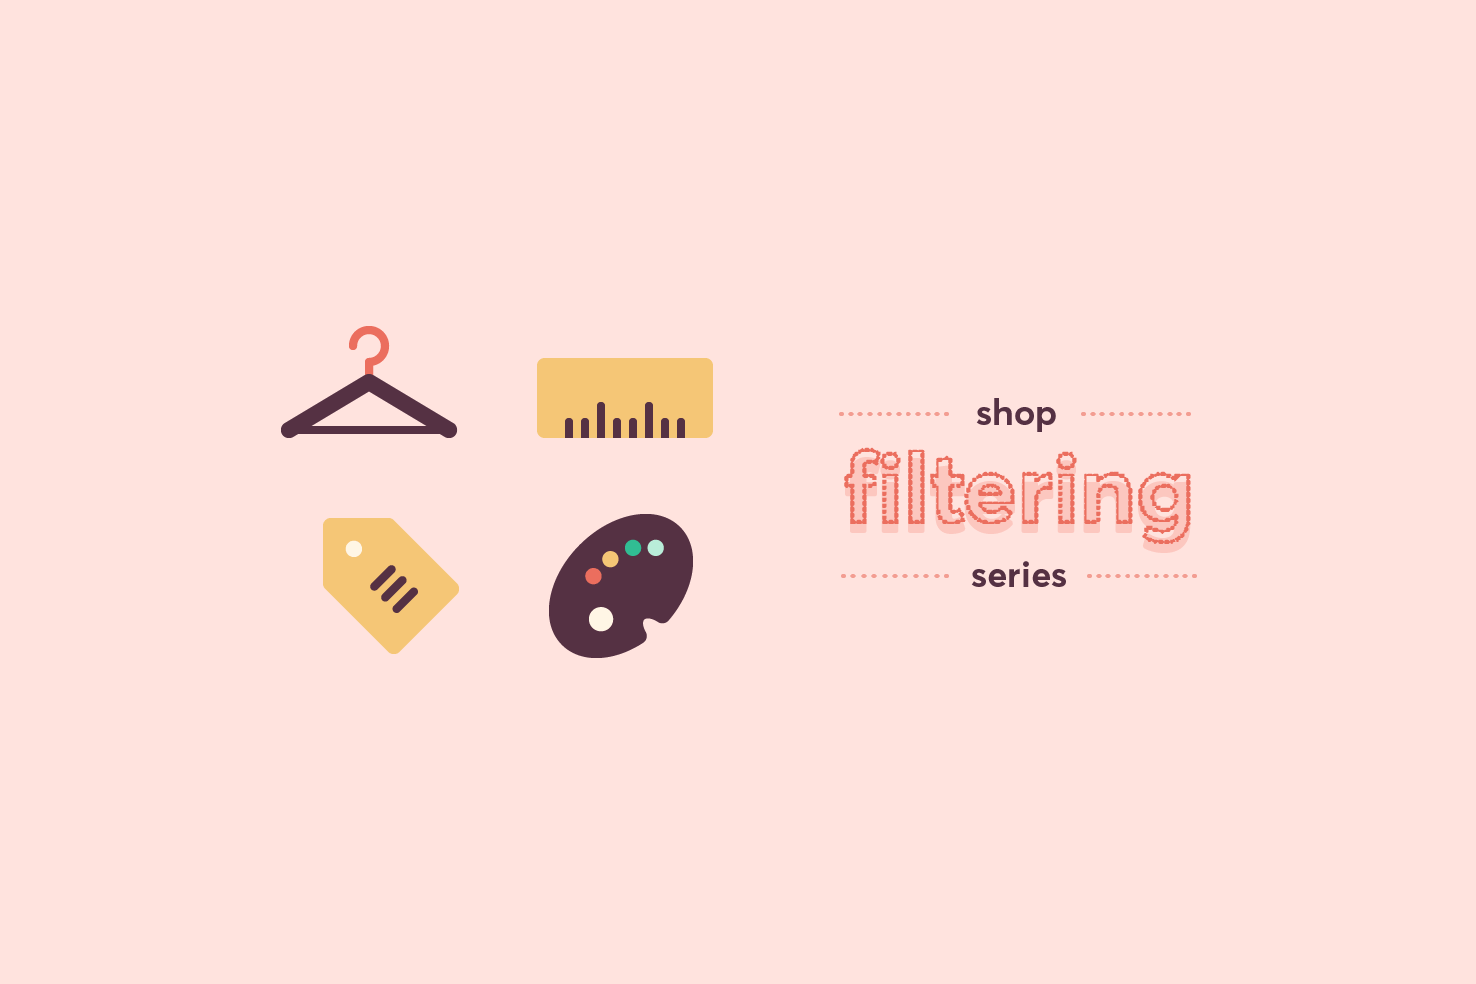 Shop filter series: visual style